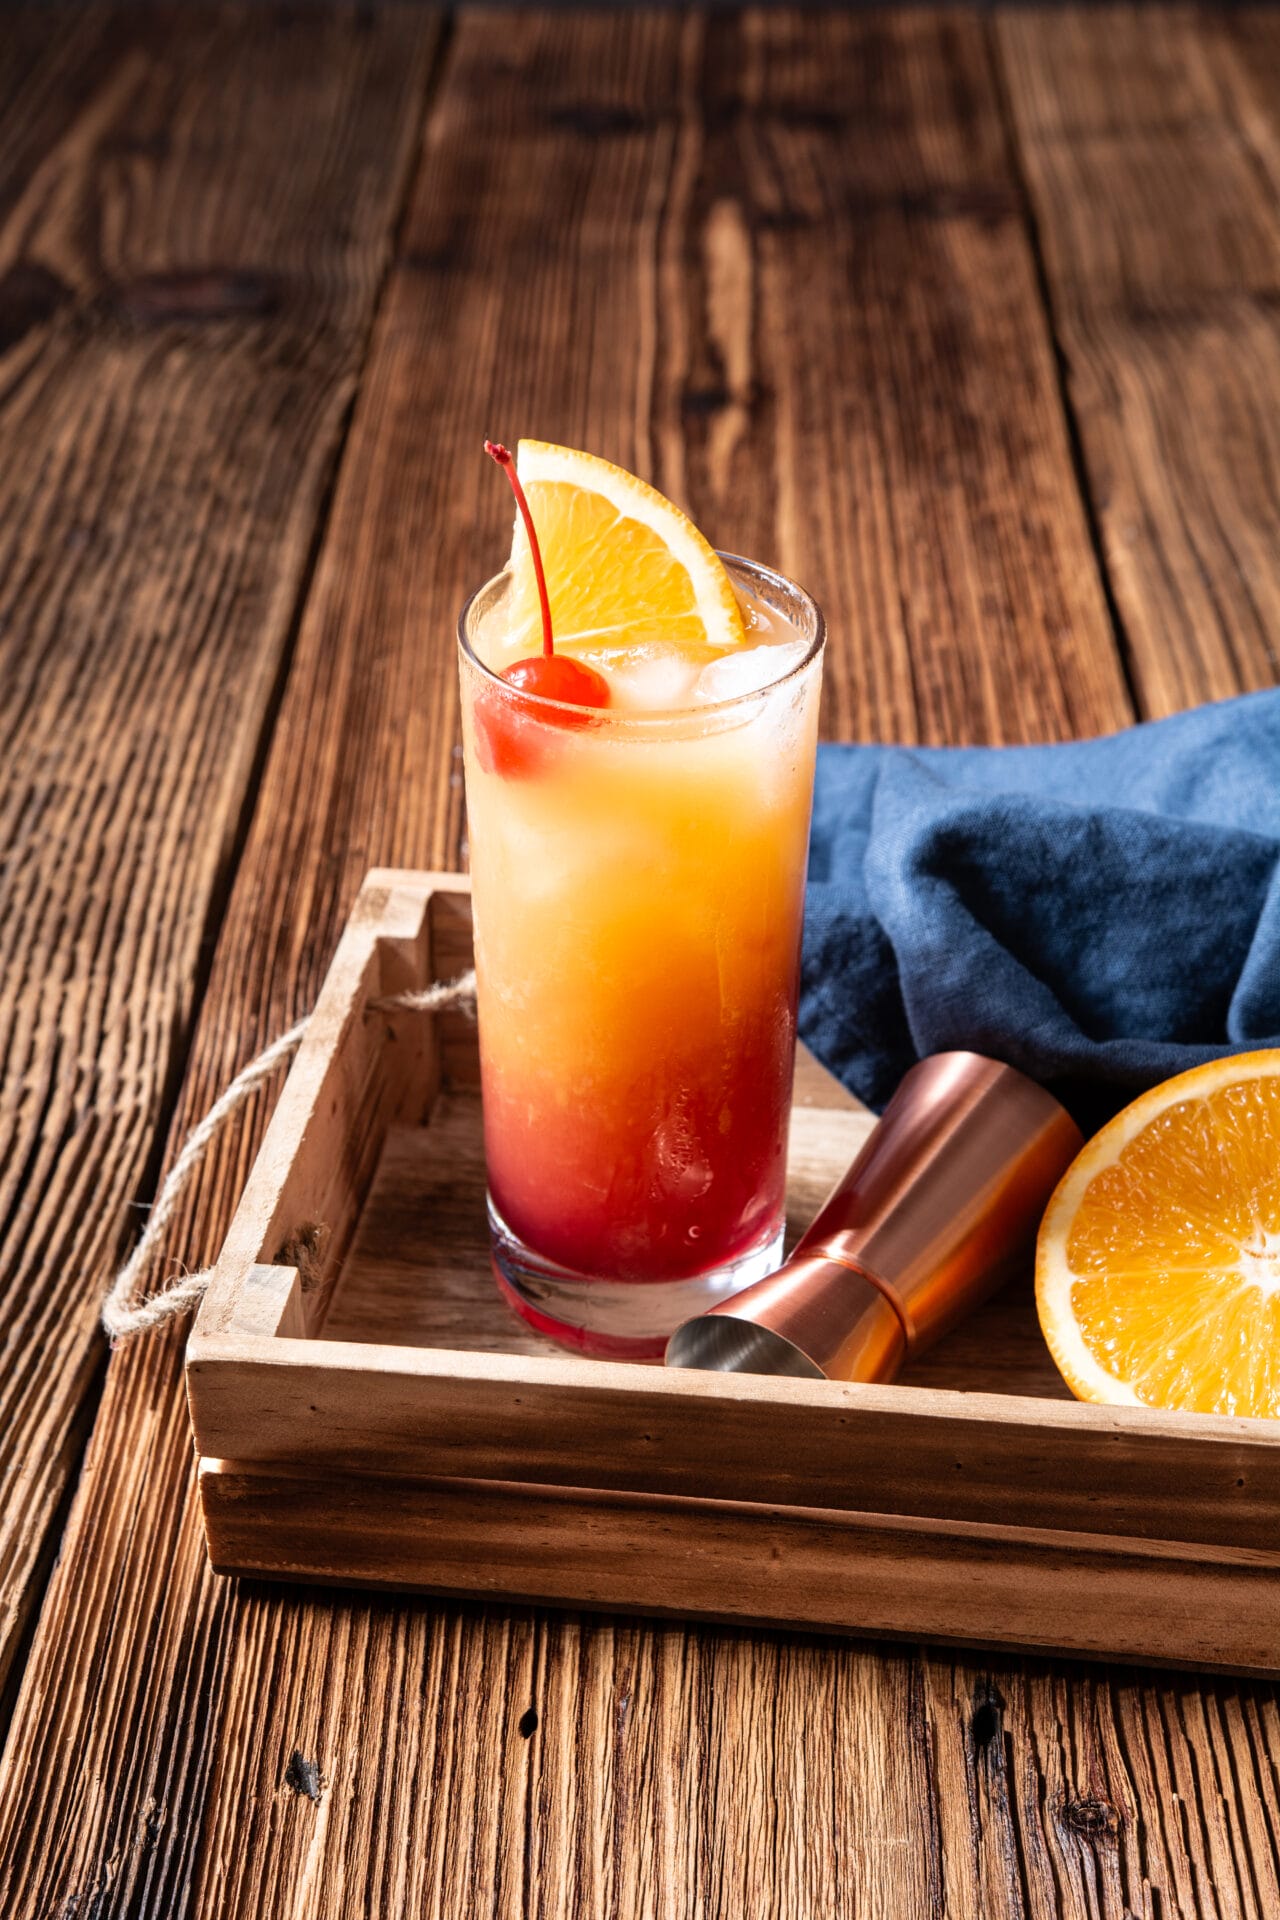 Perfect Tequila Sunrise featured picture below